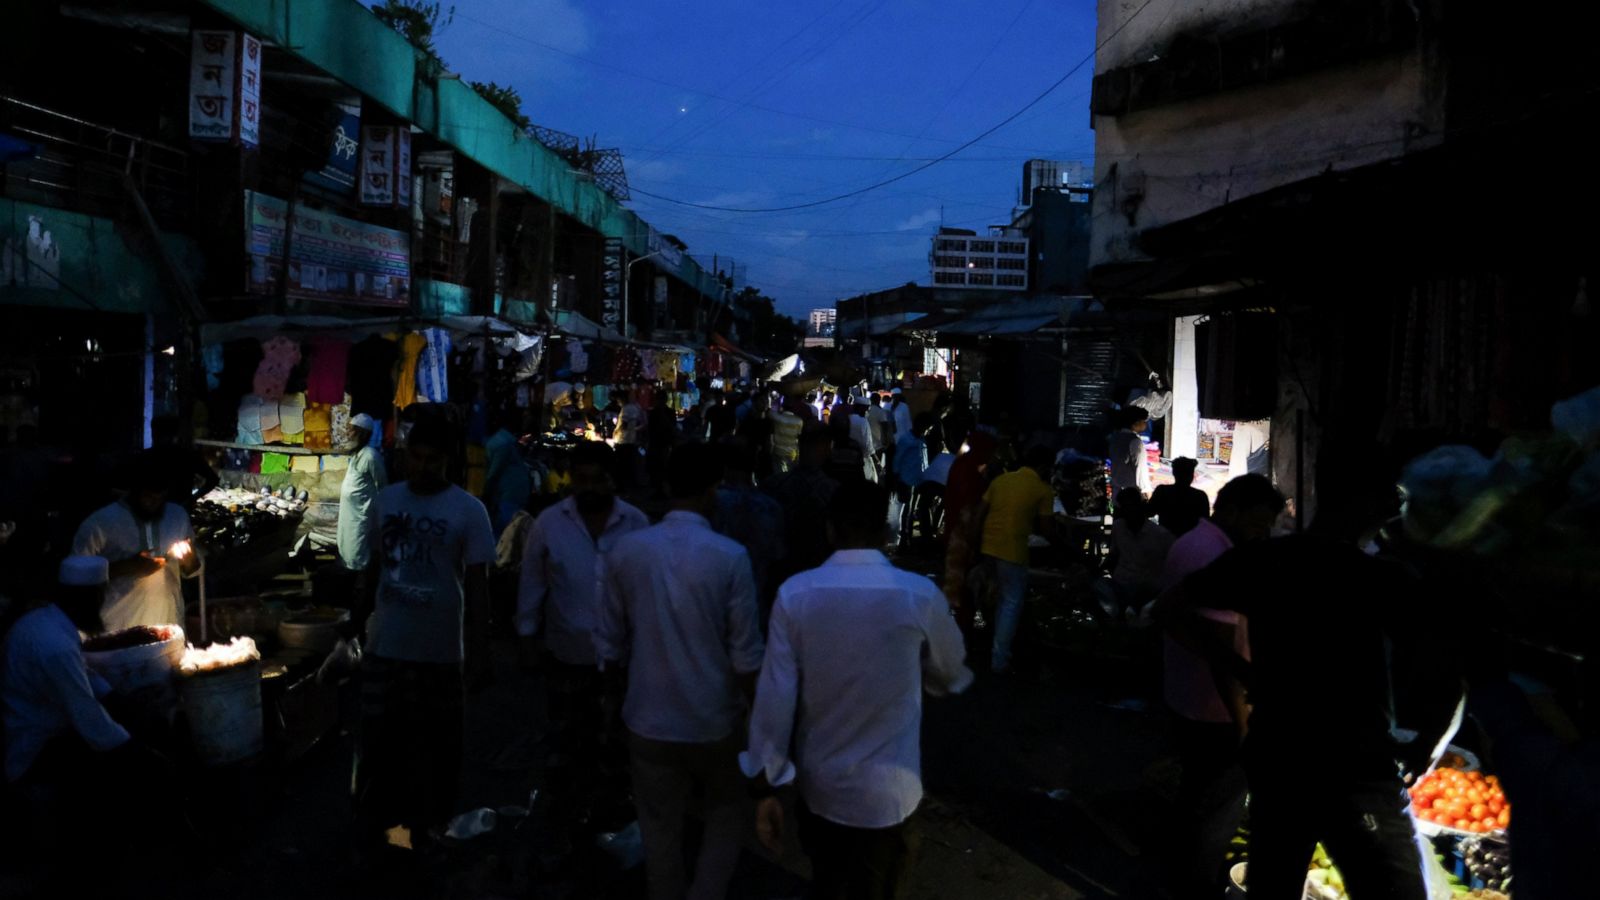 Power back in Bangladesh after grid failure causes blackout - ABC News